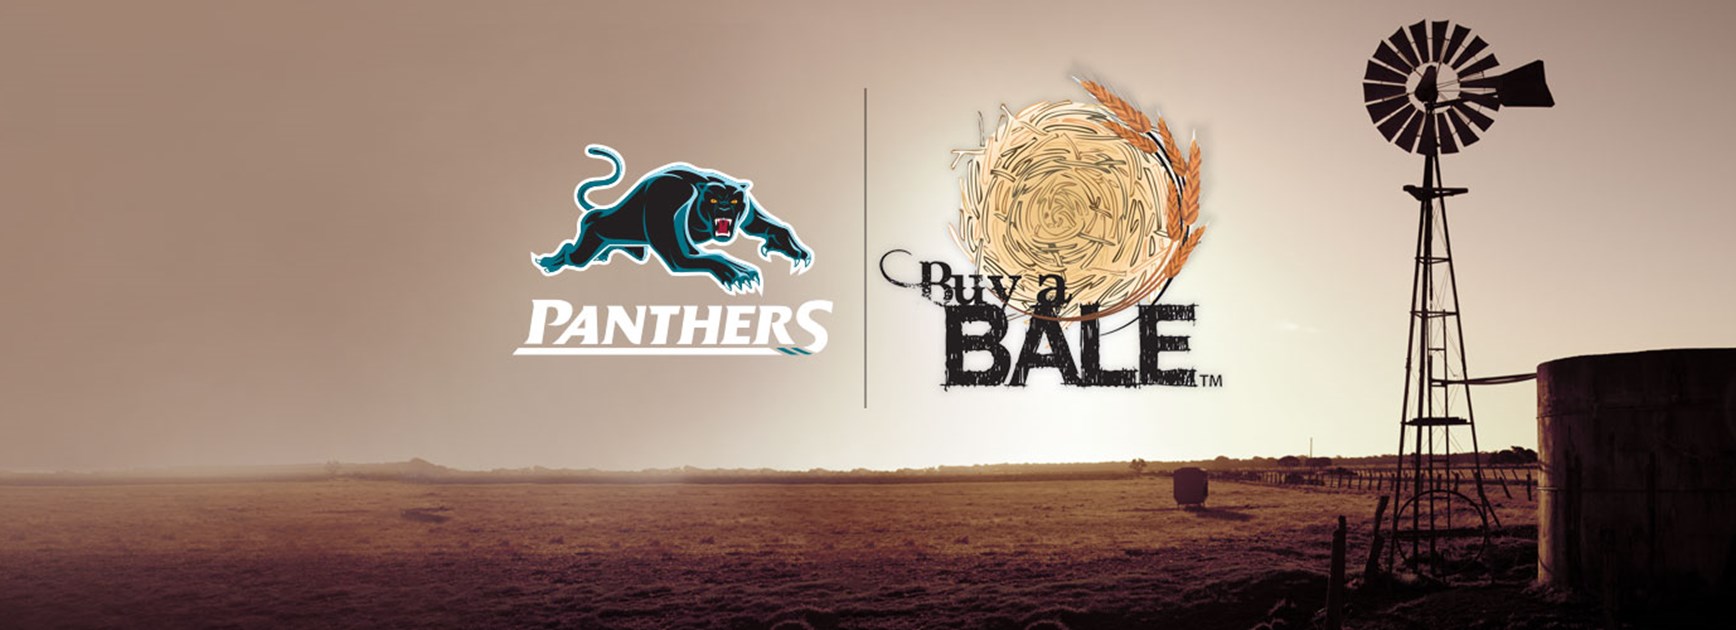 Panthers commits $200k to drought relief